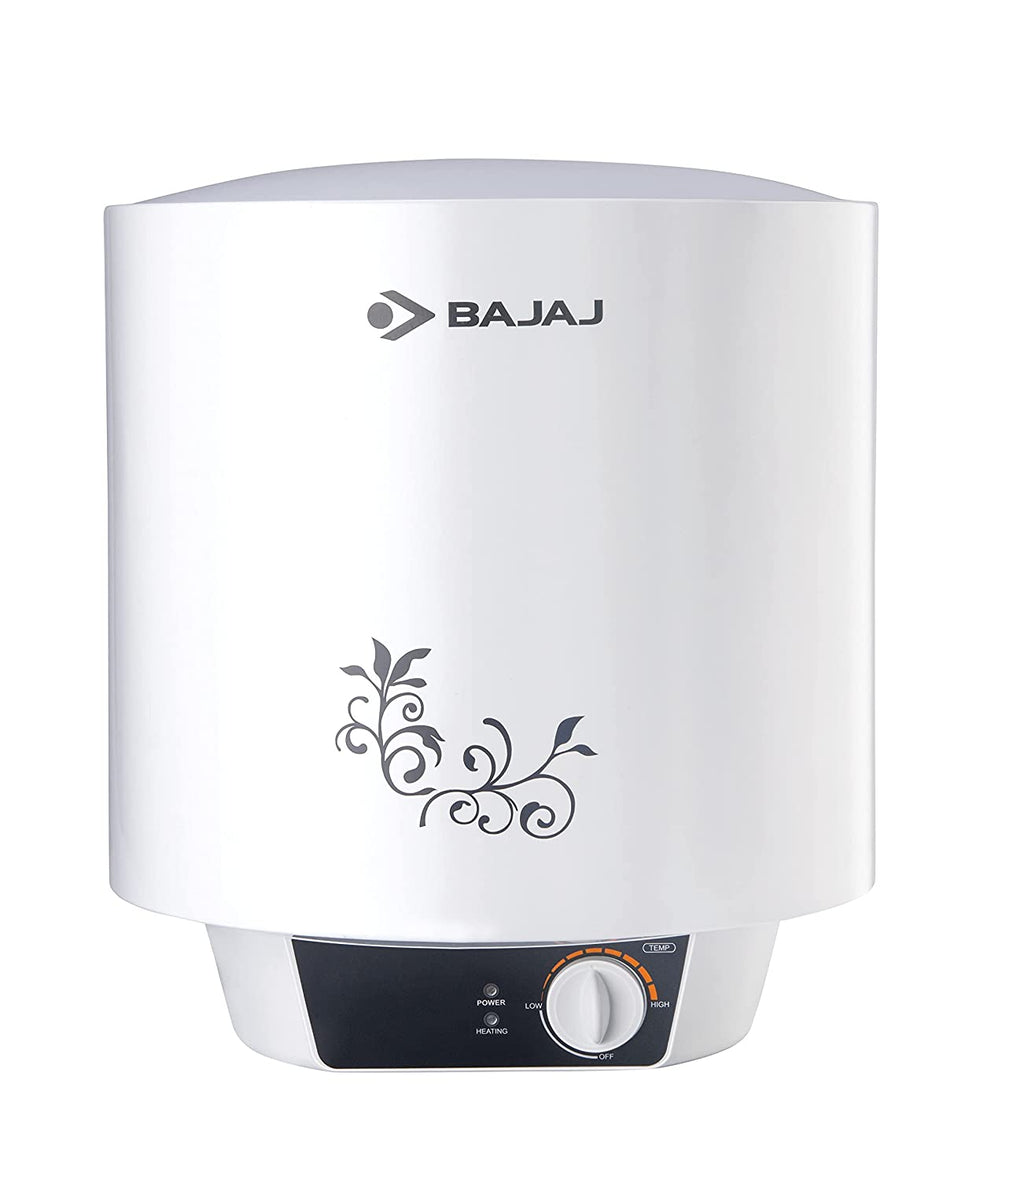 Bajaj New Shakti Neo 10 liters Metal Body 4 Star Water Heater with Multiple Safety System, White